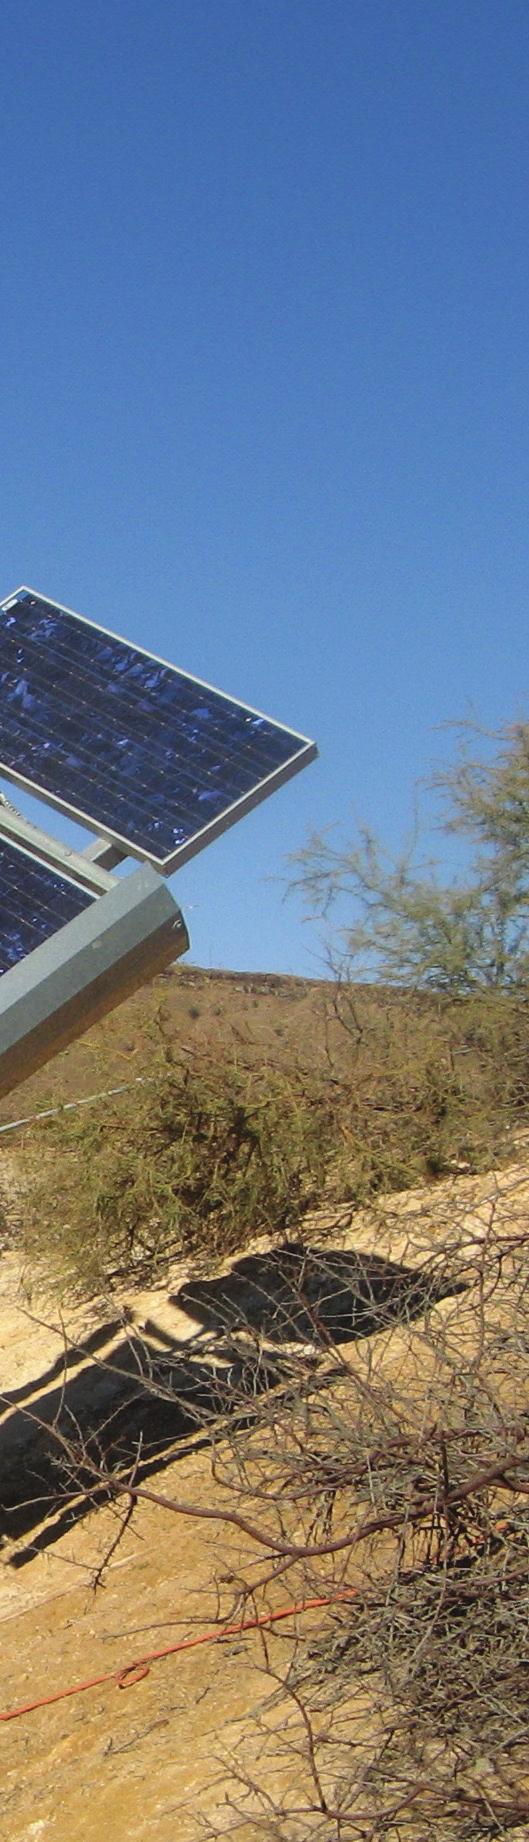 Grundfos solar pumping solutions offer many benefits over traditional grid-based pumping systems, featuring easy installation, low maintenance and low operating costs.